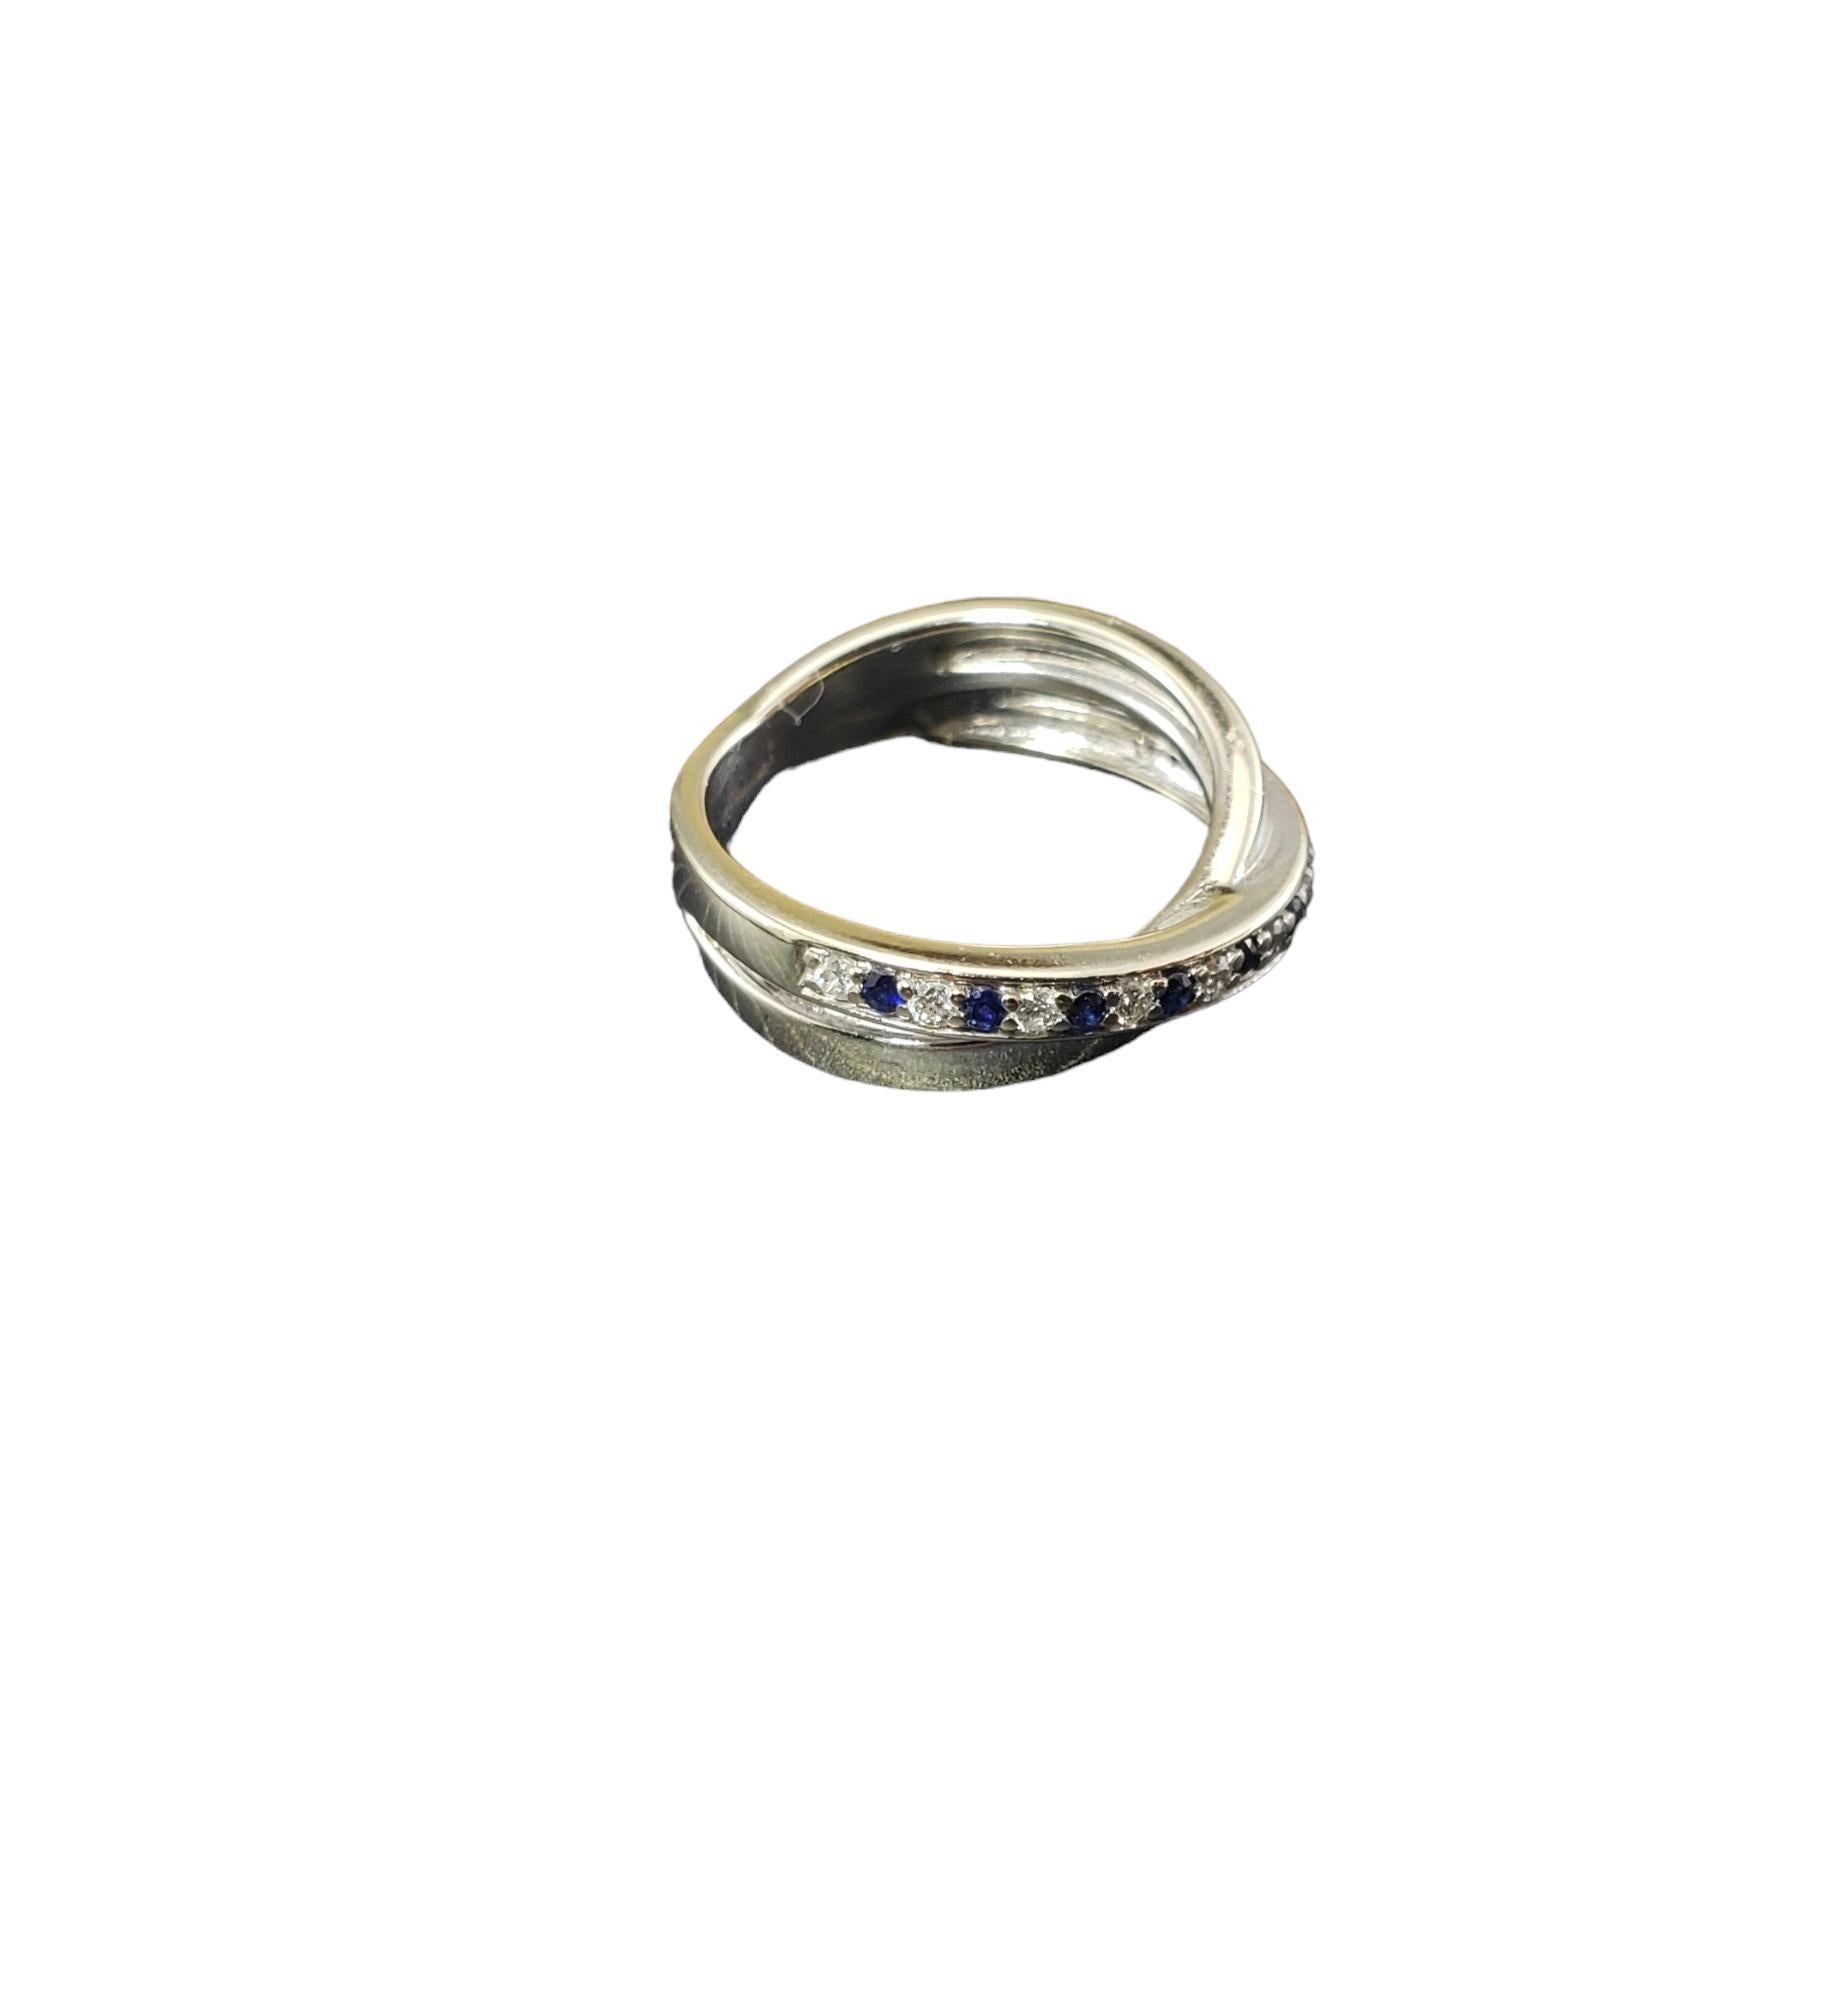 Vintage 14K White Gold Sapphire and Diamond Ring Size 4.75-

This elegant ring features 10 round blue sapphires and 11 round brilliant cut diamonds set in classic 14K white gold.  Width: 6 mm. Shank: 3 mm.

Approximate total diamond weight: .15